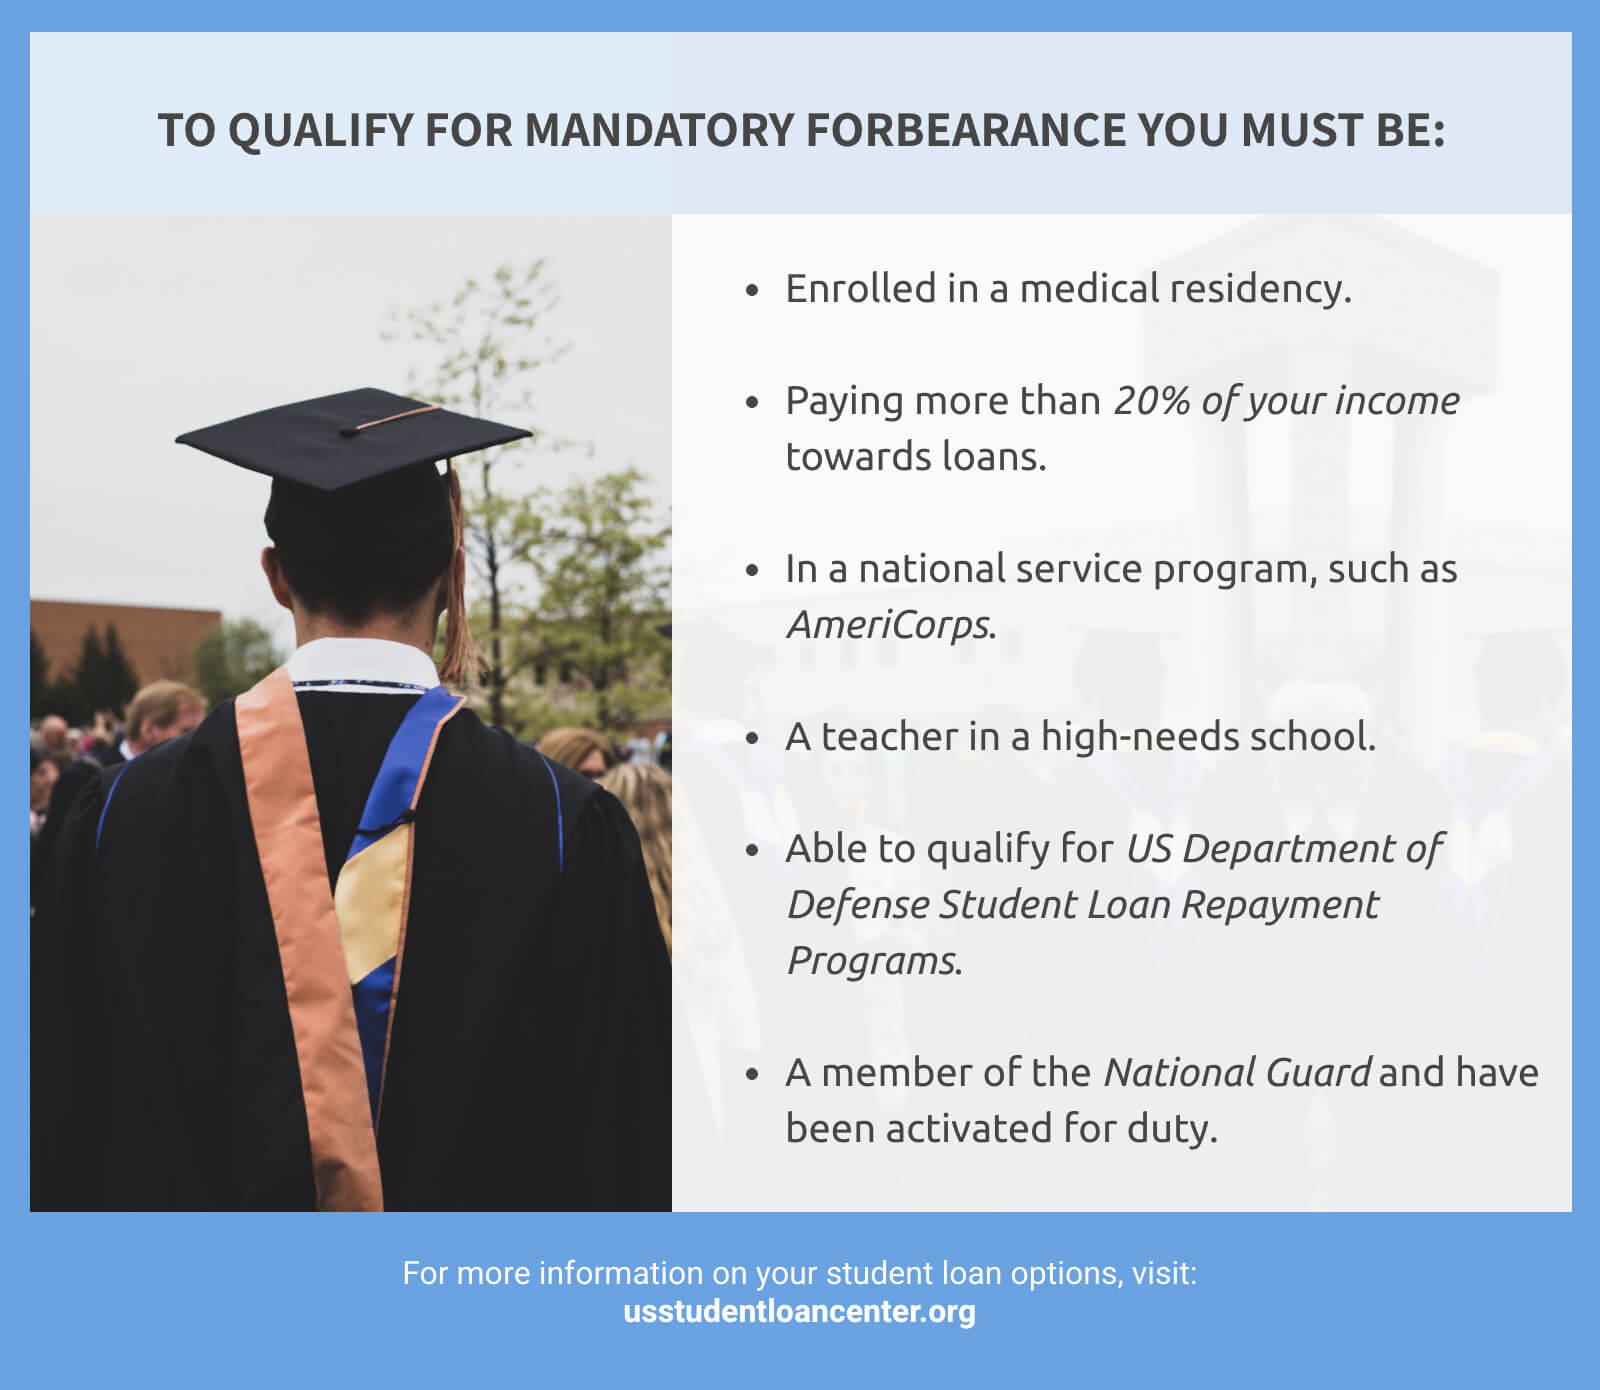 To Qualify for Mandatory Forbearance - 1